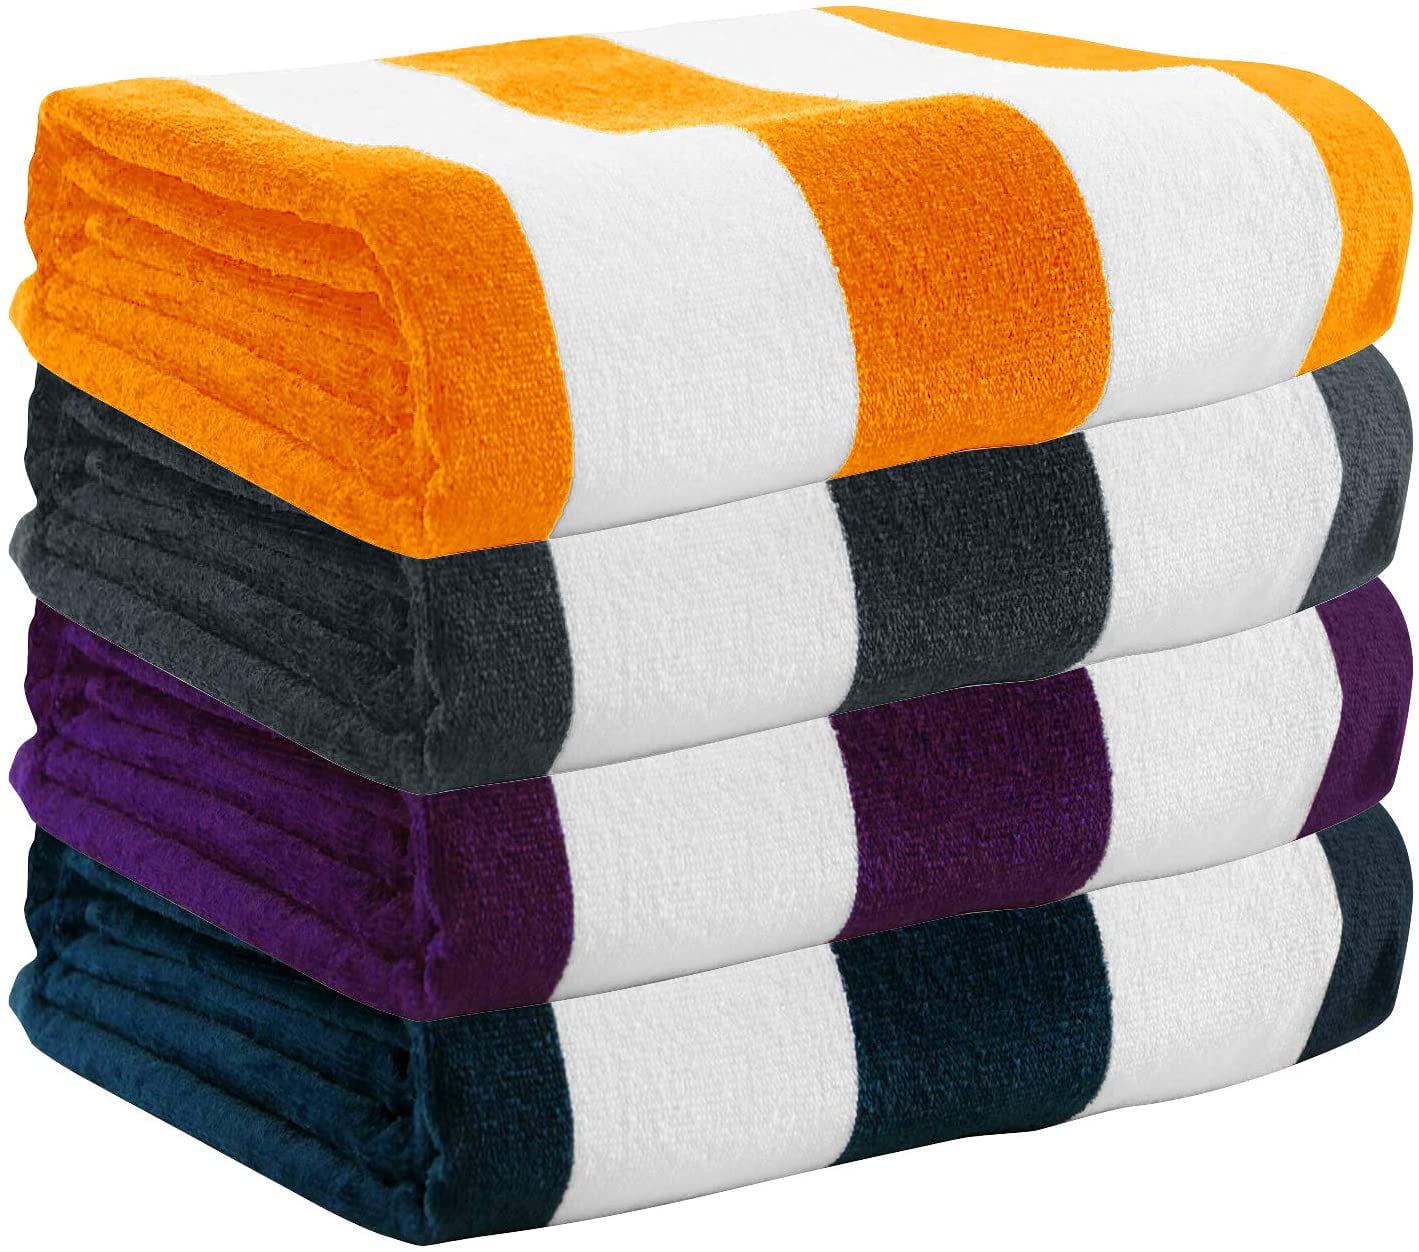 Navy, 4 Pack- 30 x 60 Cabana Stripe Pool Towels for Adults. 4 Pack Plush Velour 100% Cotton Beach Towels 